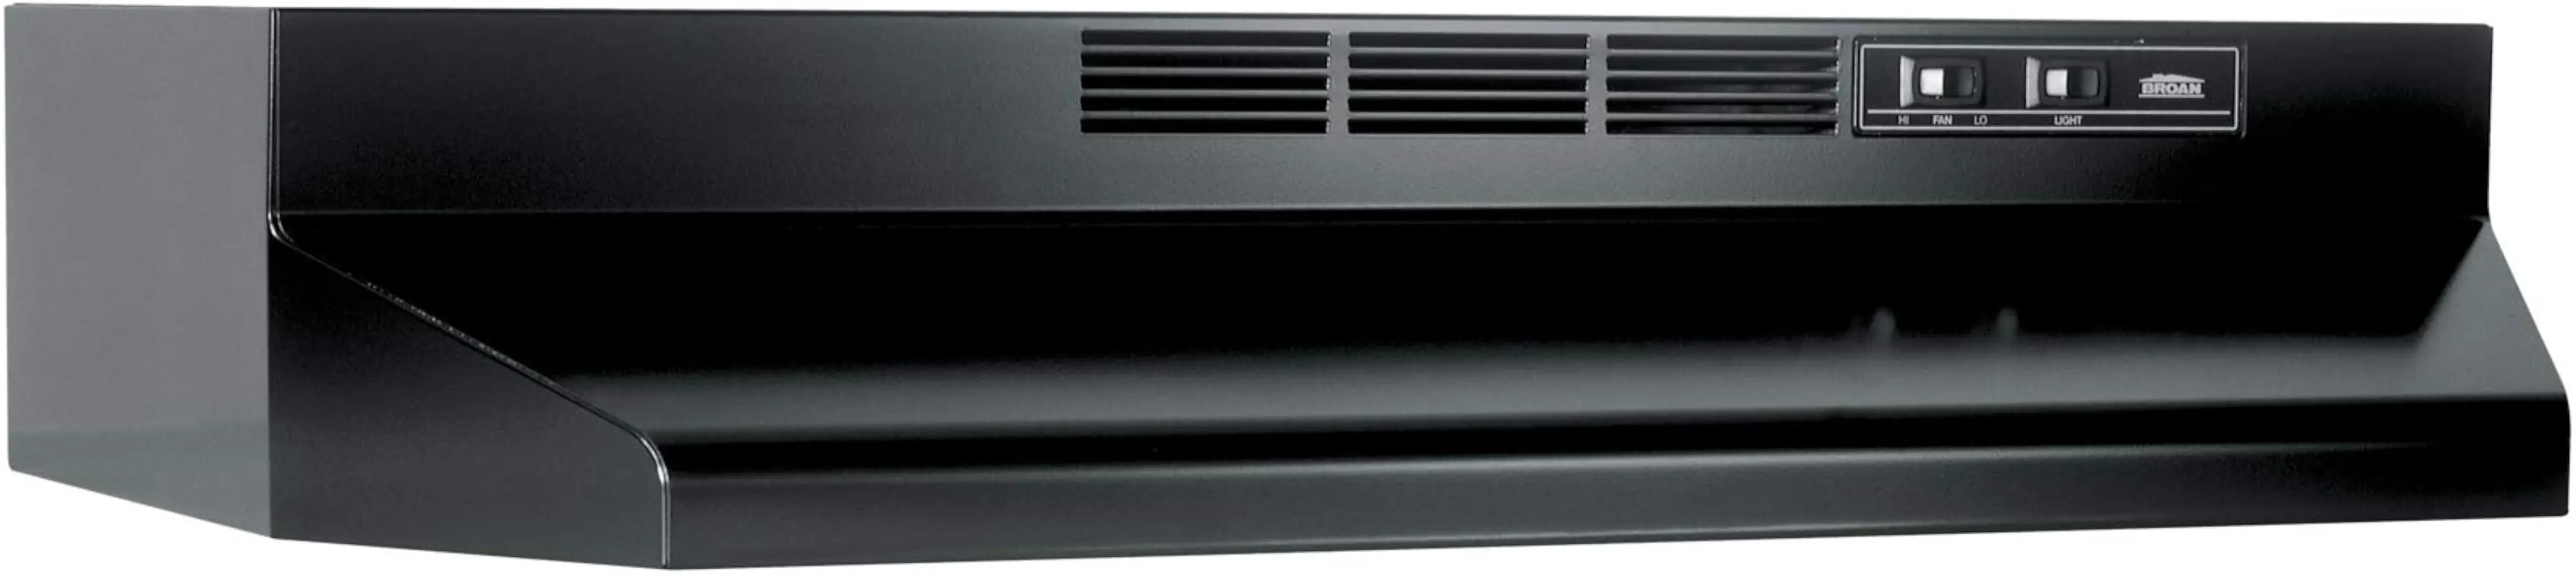 

Broan-NuTone 413023 Ductless Range Hood Insert with Light, Exhaust Fan for Under Cabinet, 30-Inch, Black